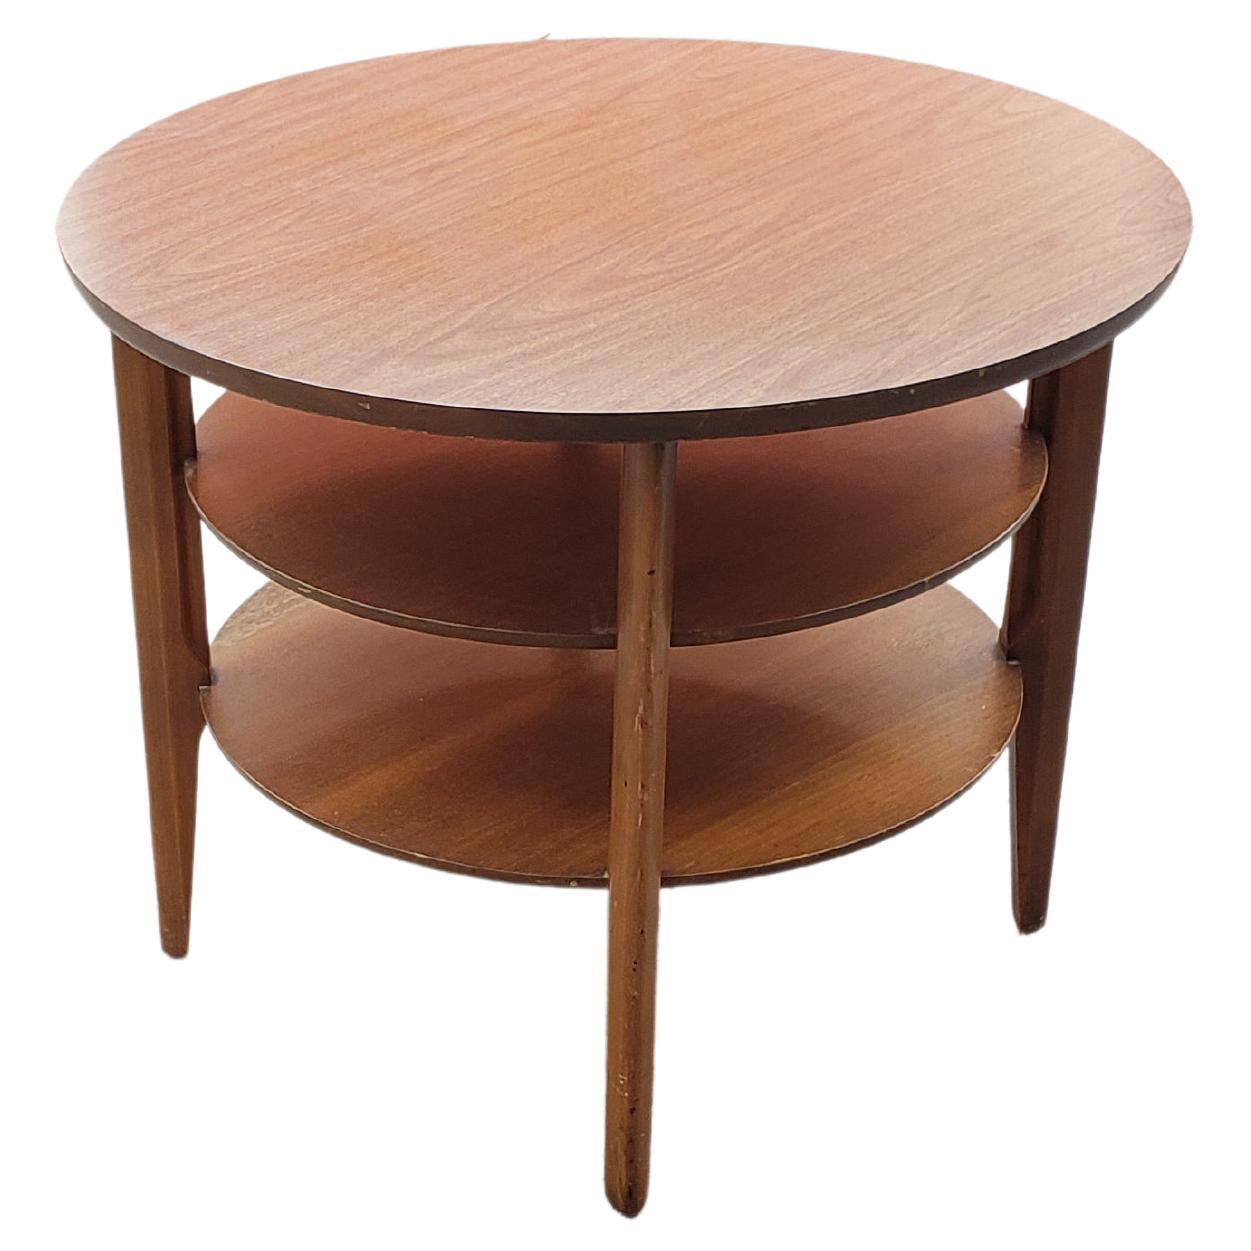 American Brandt Furniture 3 Tier Formica and Walnut Center / Cocktail Table, circa 1960s For Sale